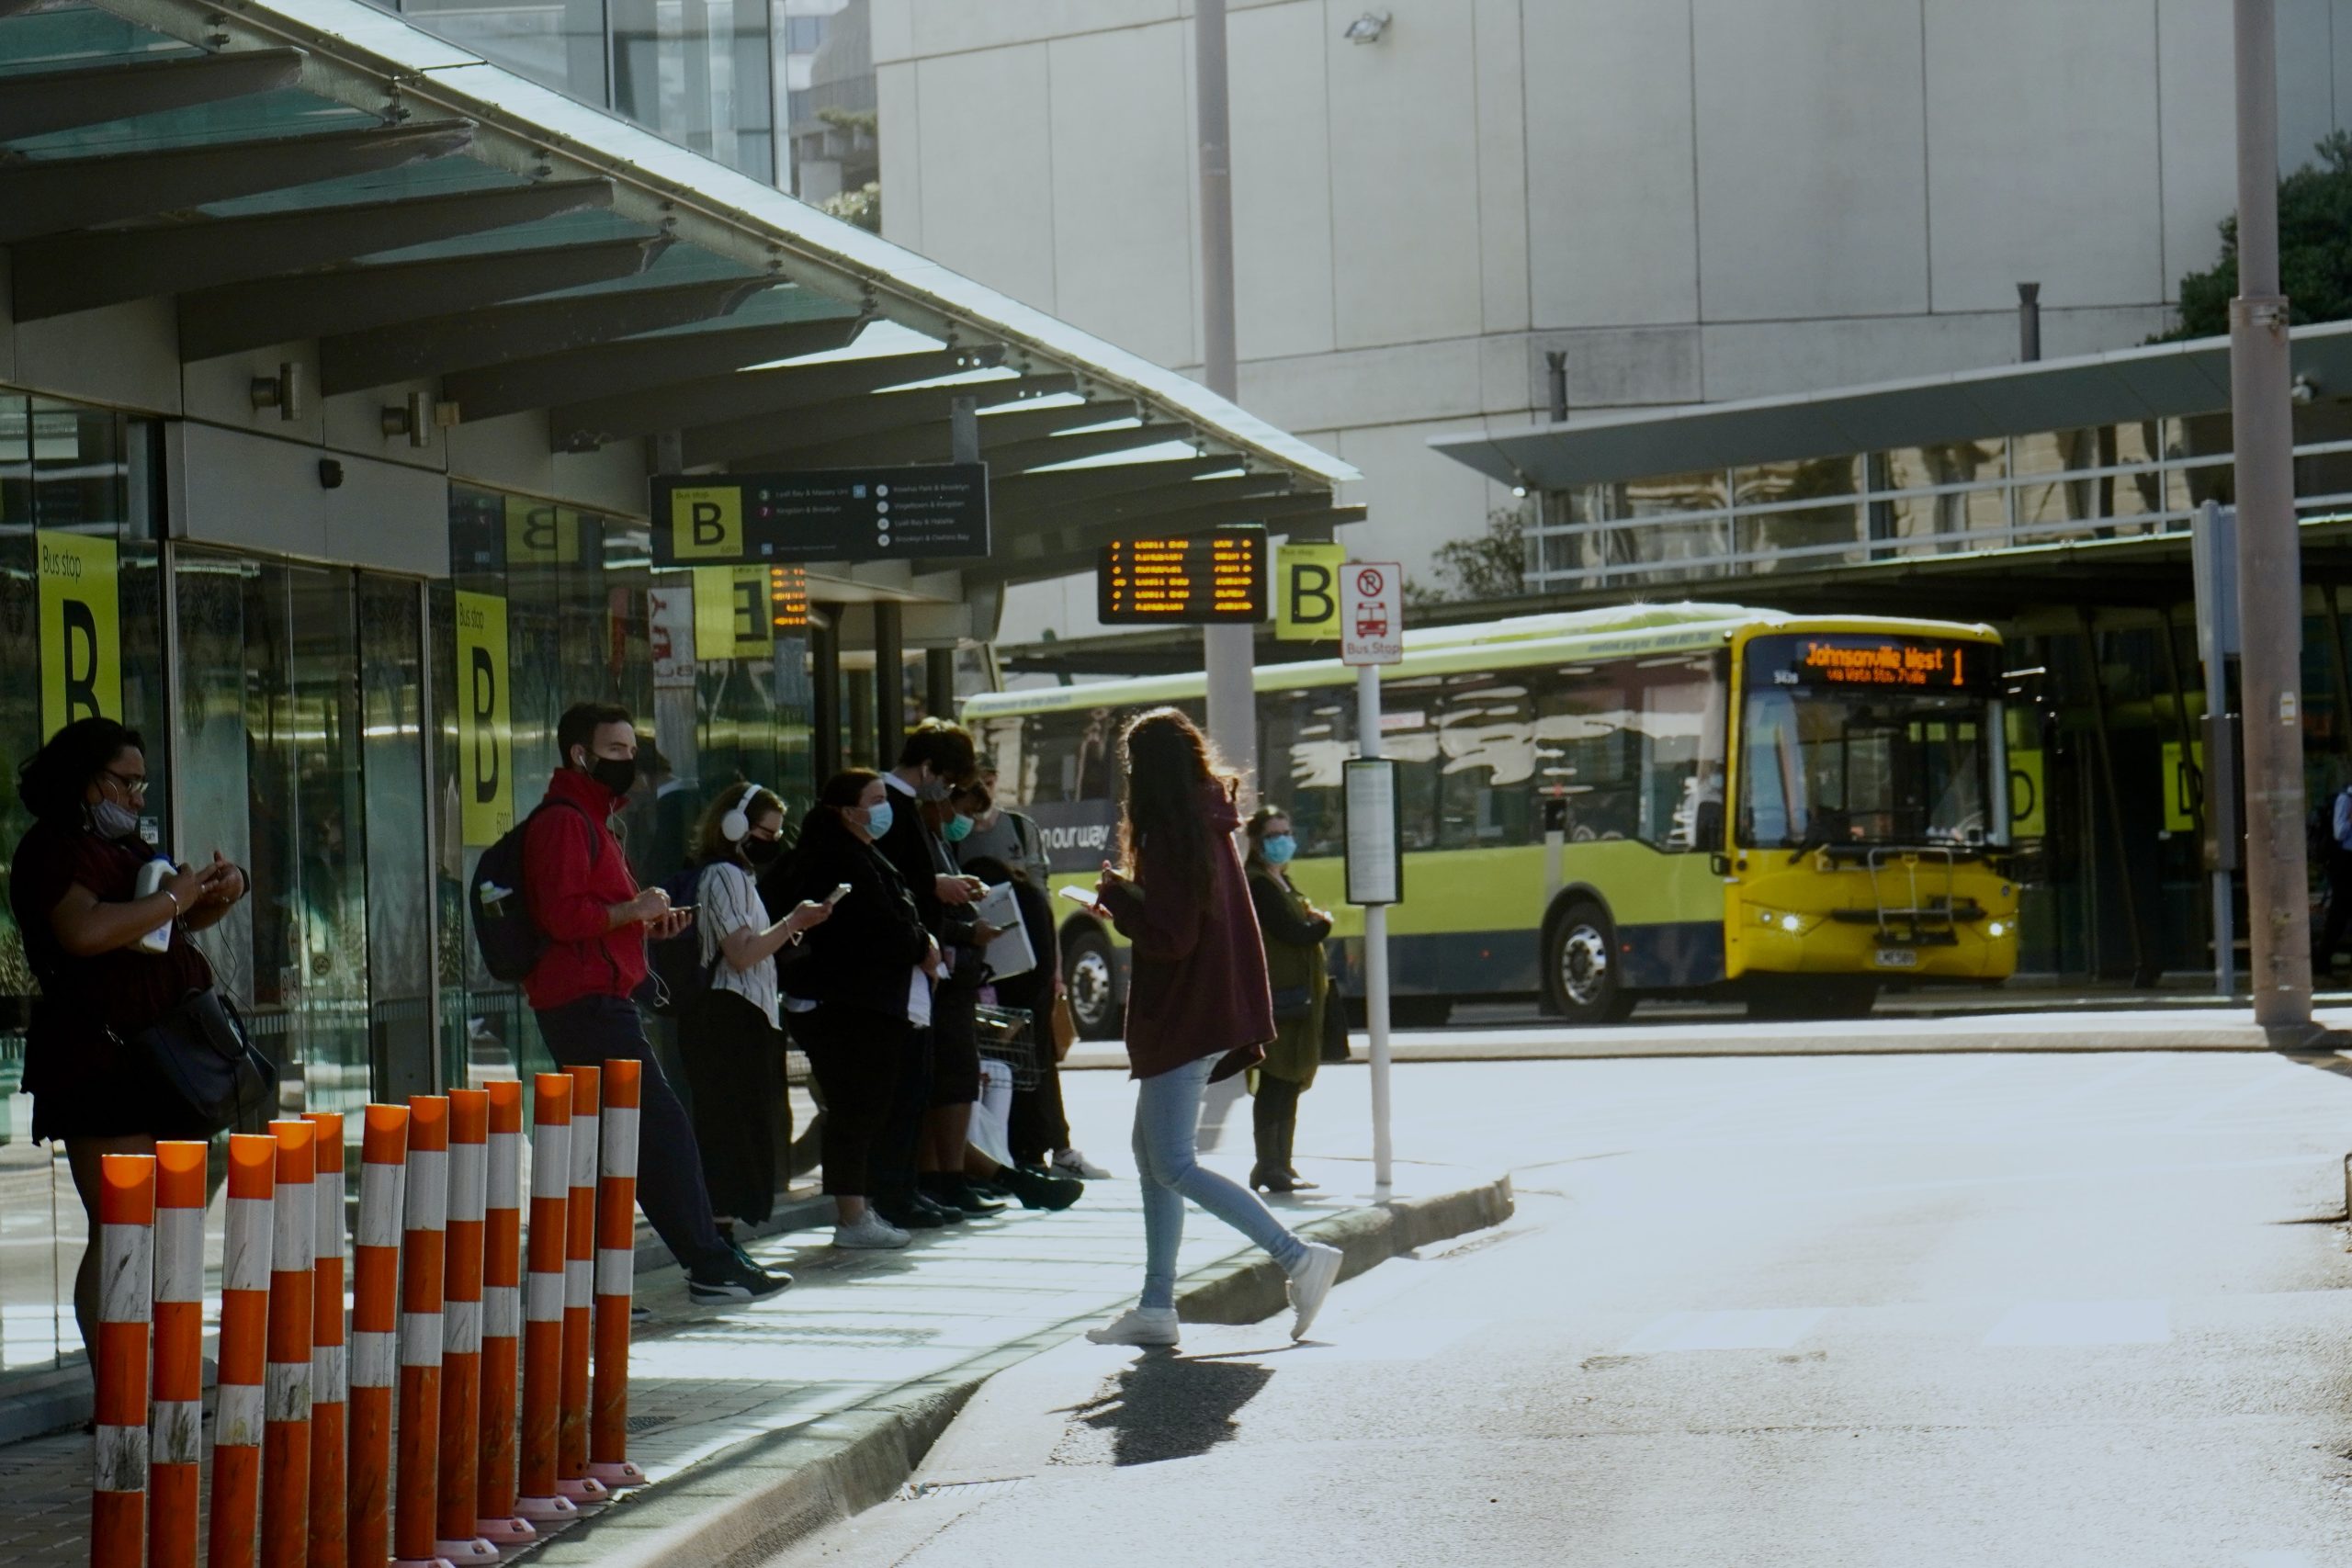 People waiting for the bus at the Wellington Central bus hub